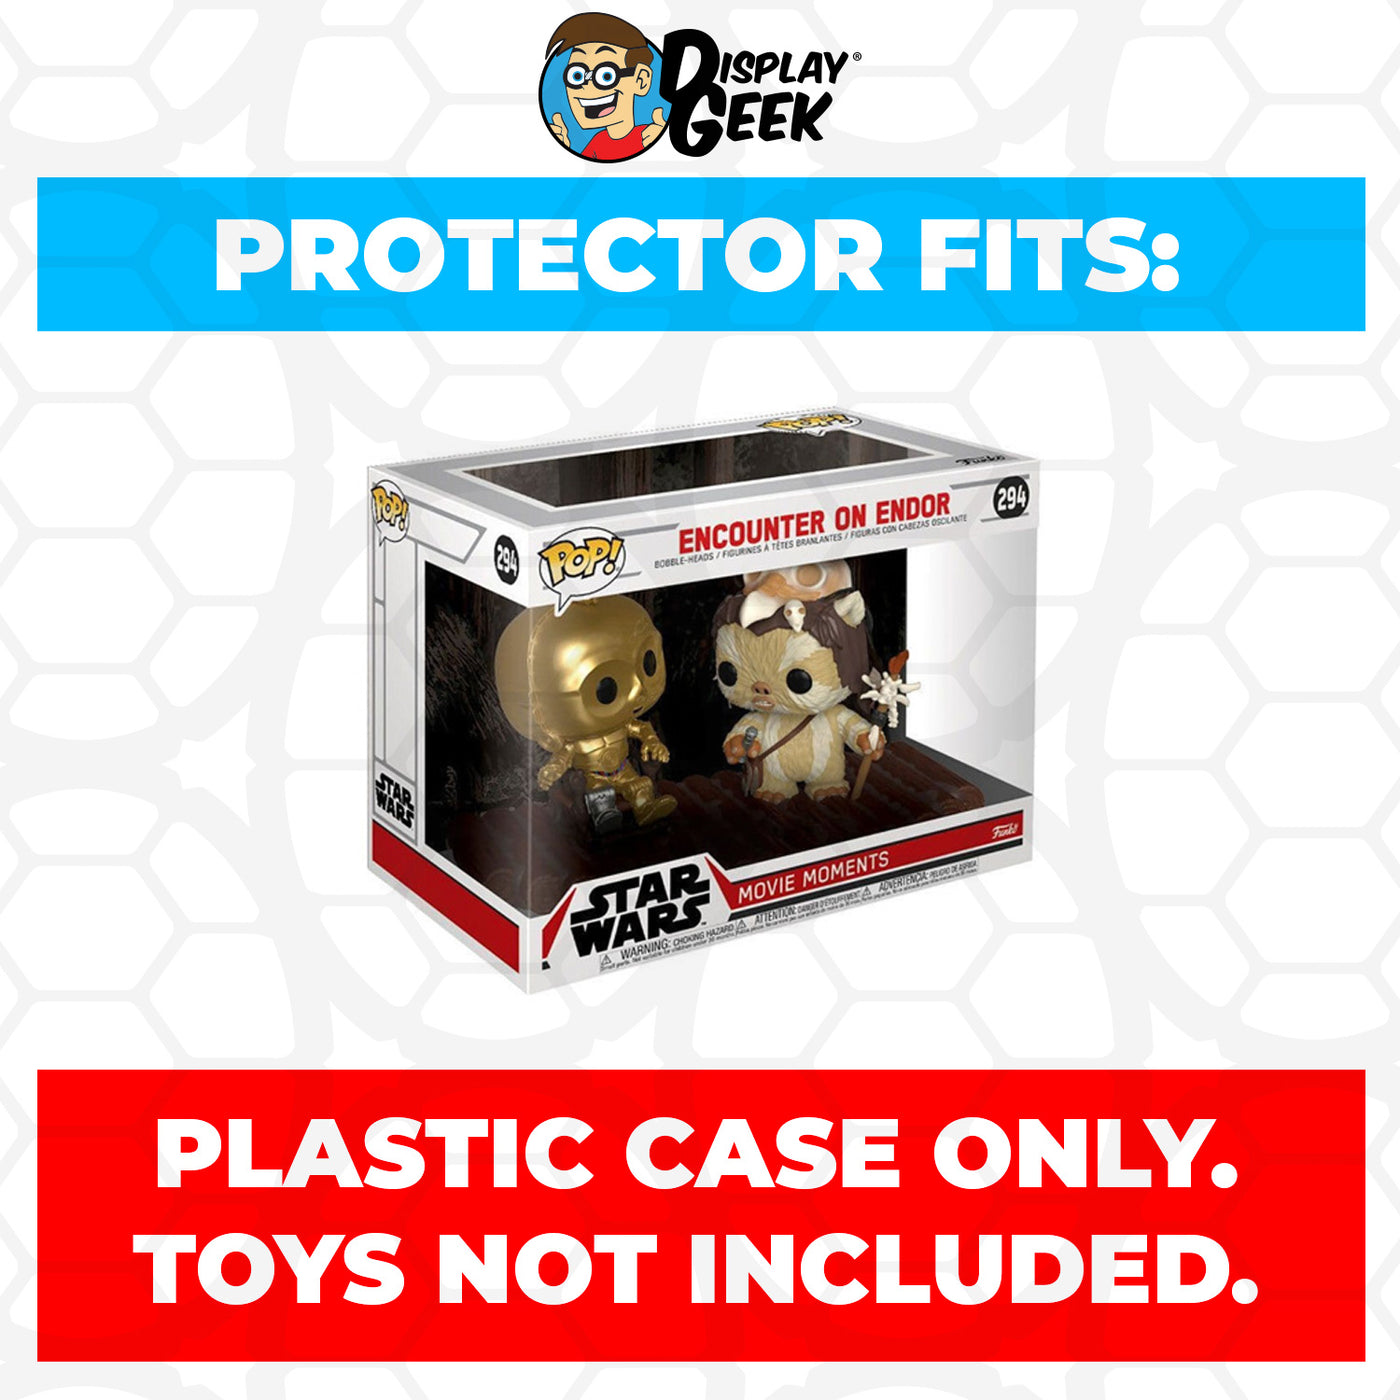 Pop Protector for Encounter on Endor #294 Funko Pop Movie Moments on The Protector Guide App by Display Geek